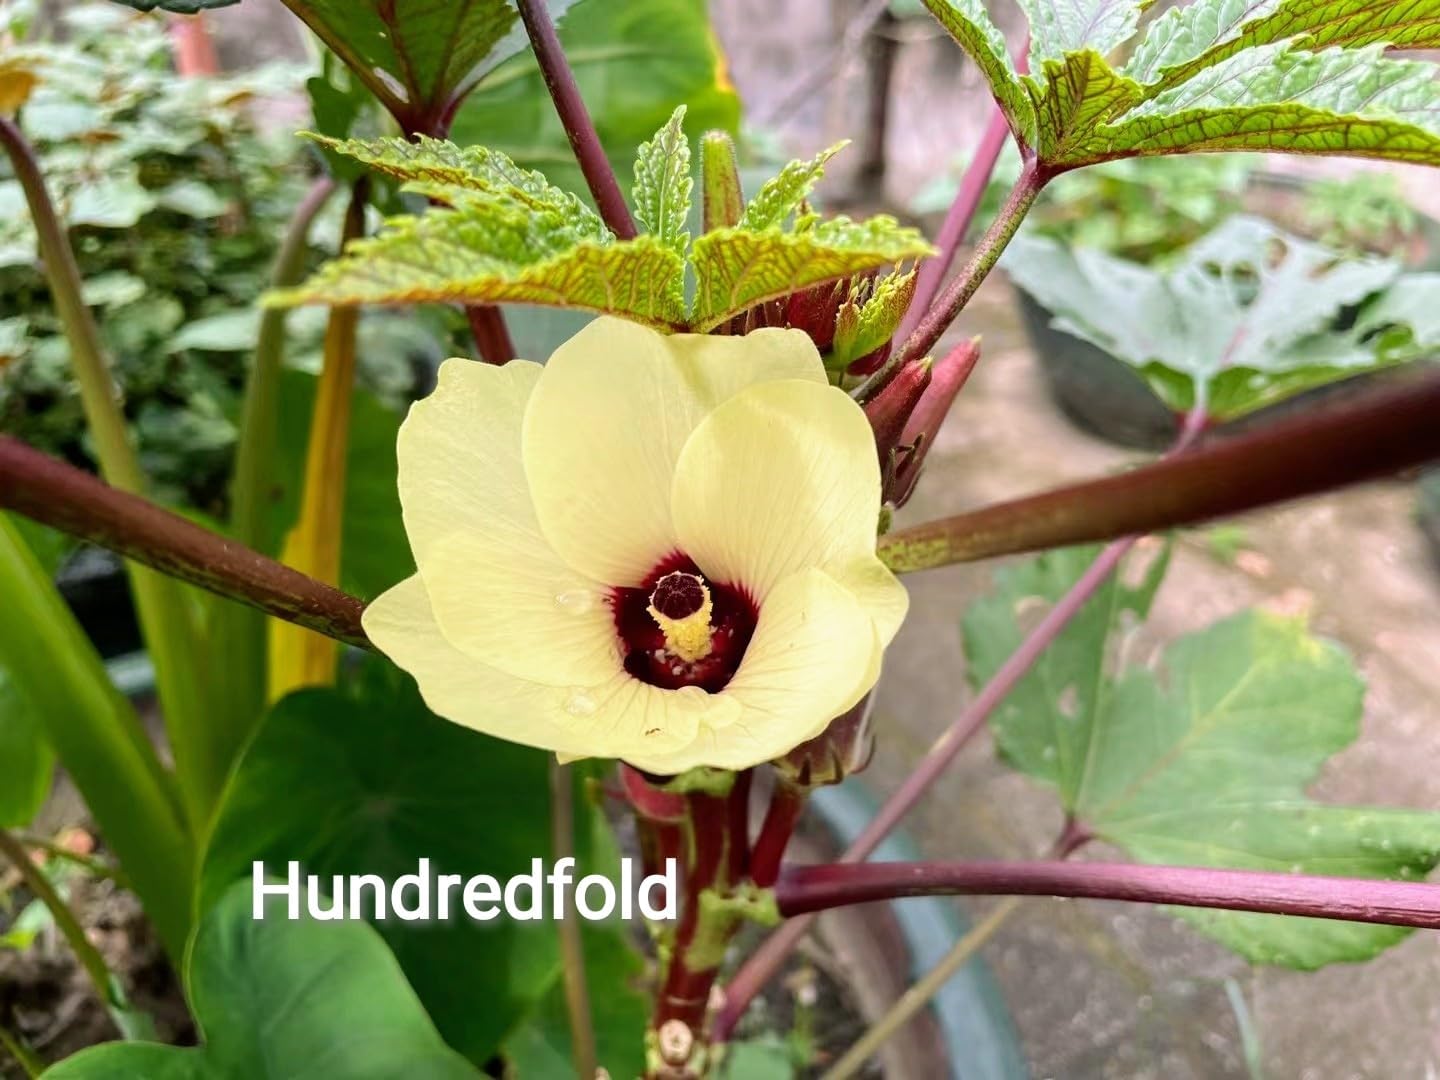 Hundredfold Organic Red Burgundy Okra 100 Vegetable Seeds - Abelmoschus esculentus Delicious Red Pods & Beautiful Flowers, Non-GMO